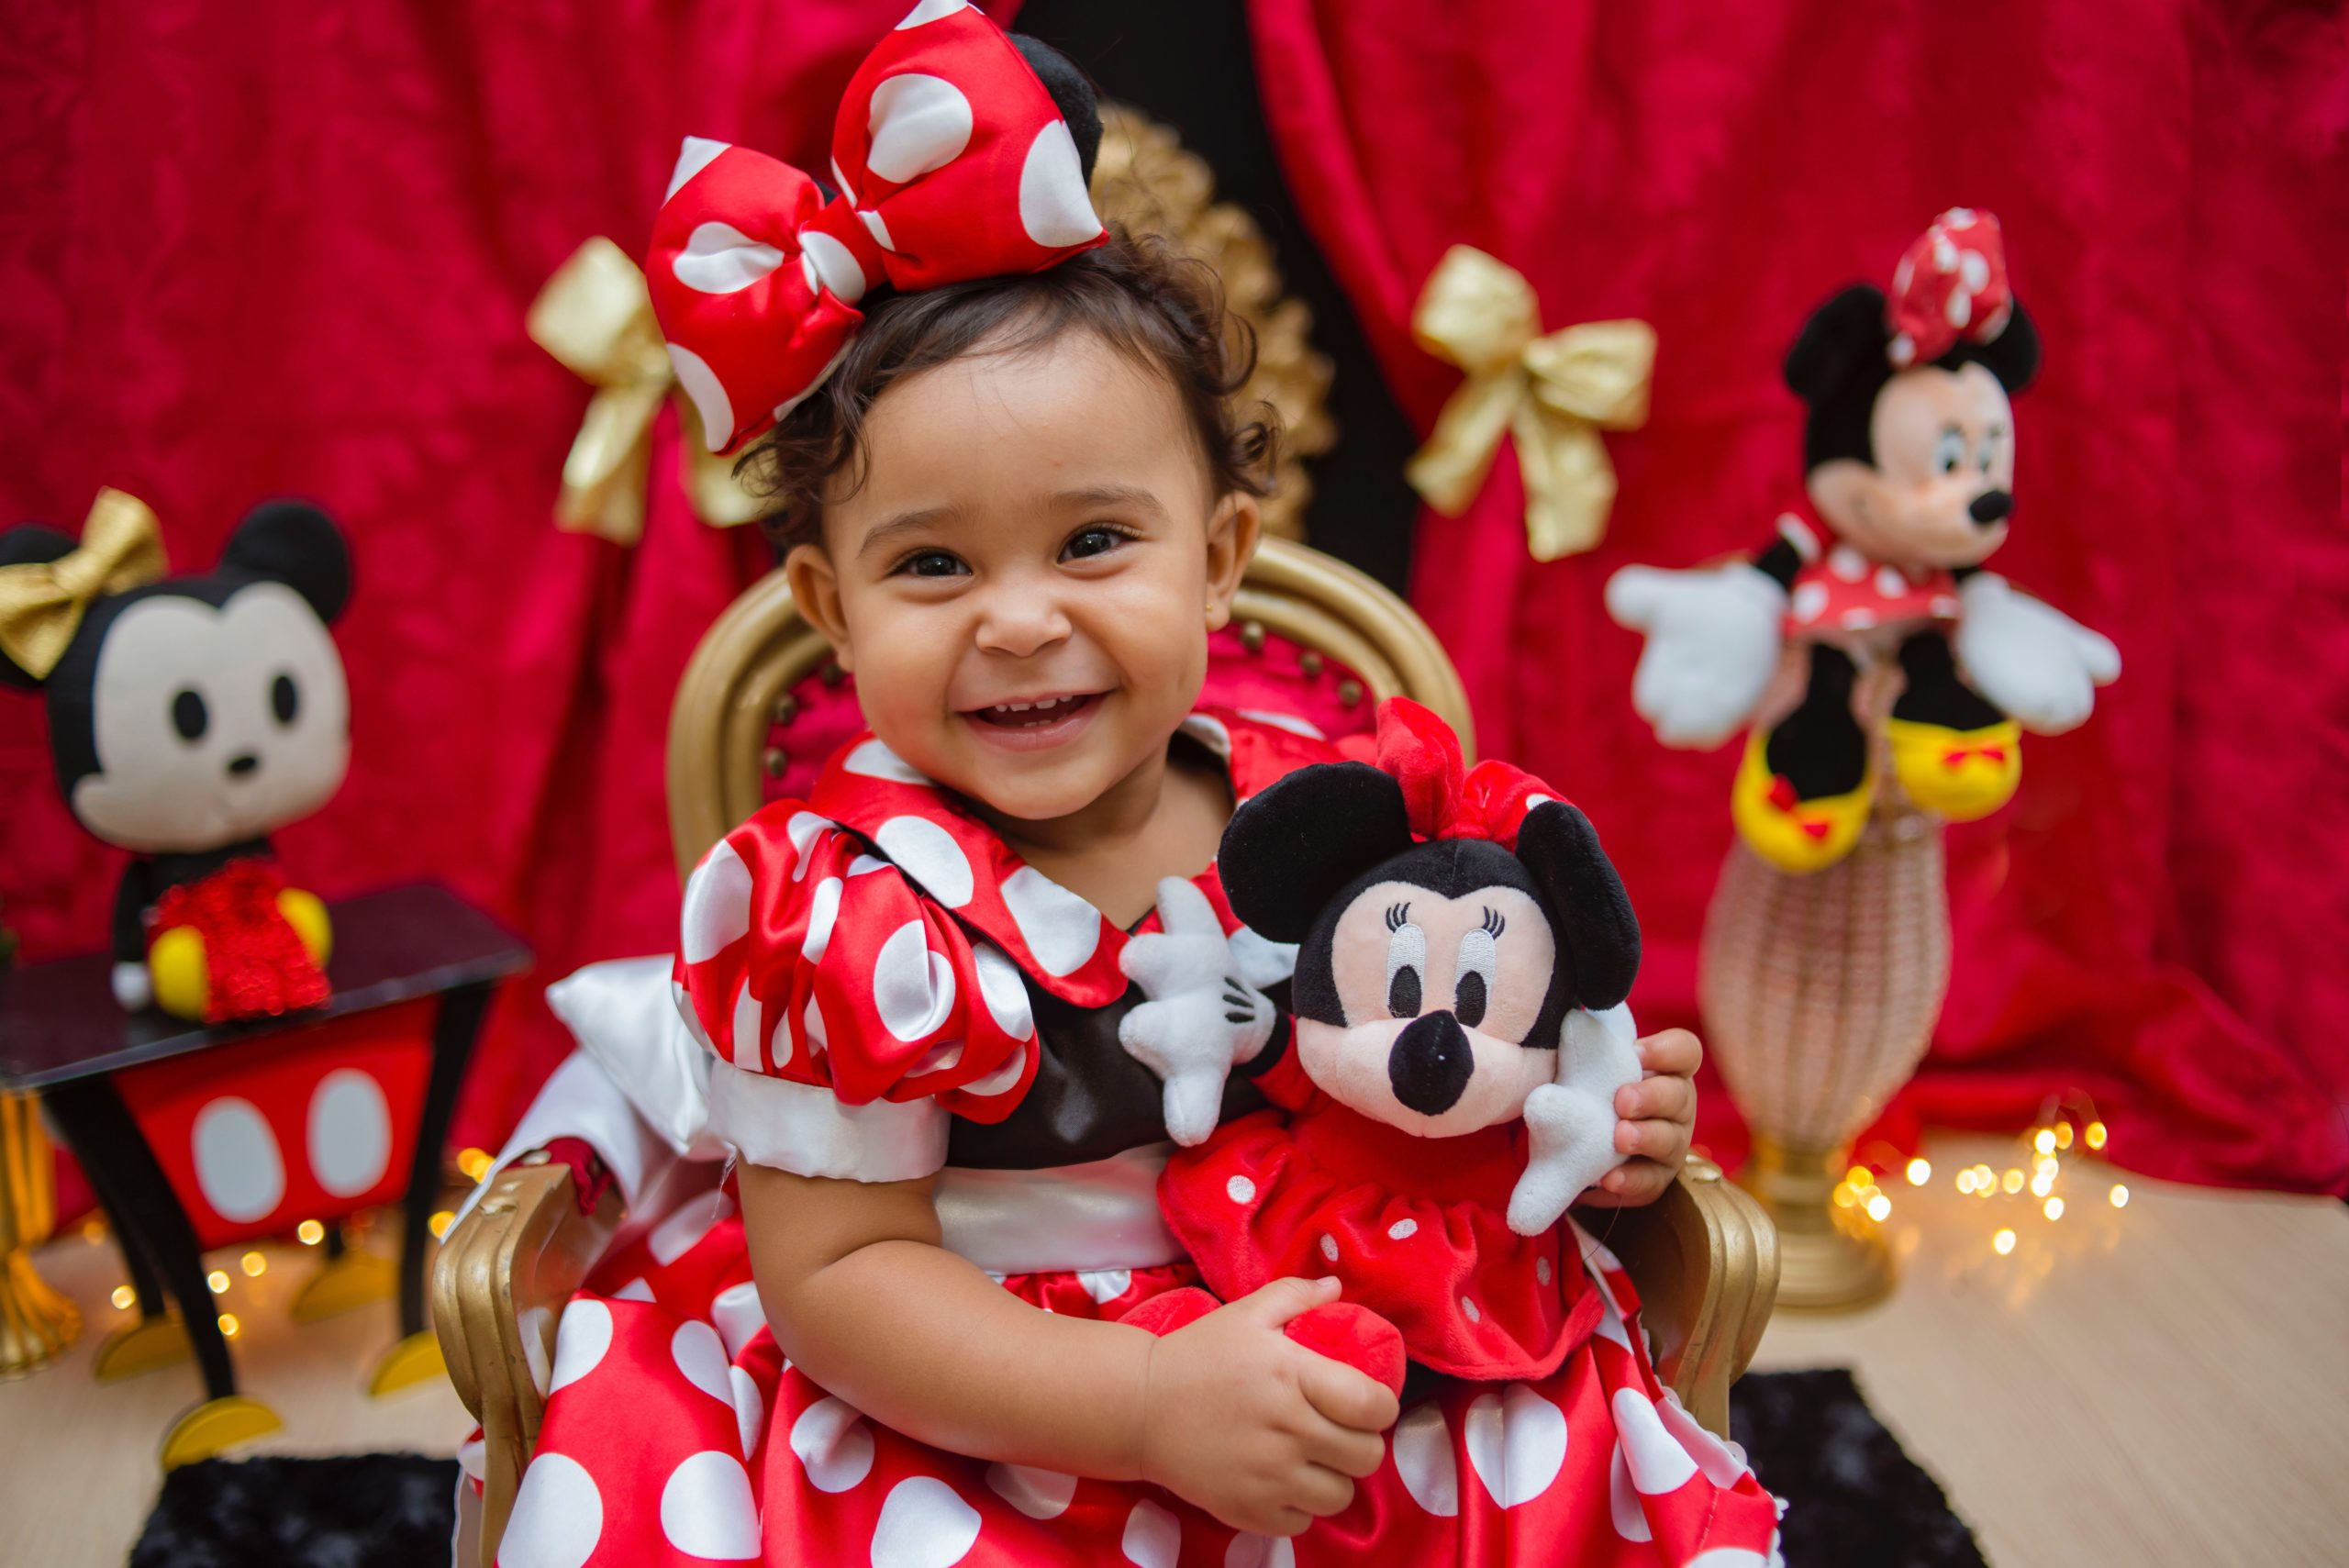 A young girl dresses up as her favorite Disney character, the iconic Minnie Mouse